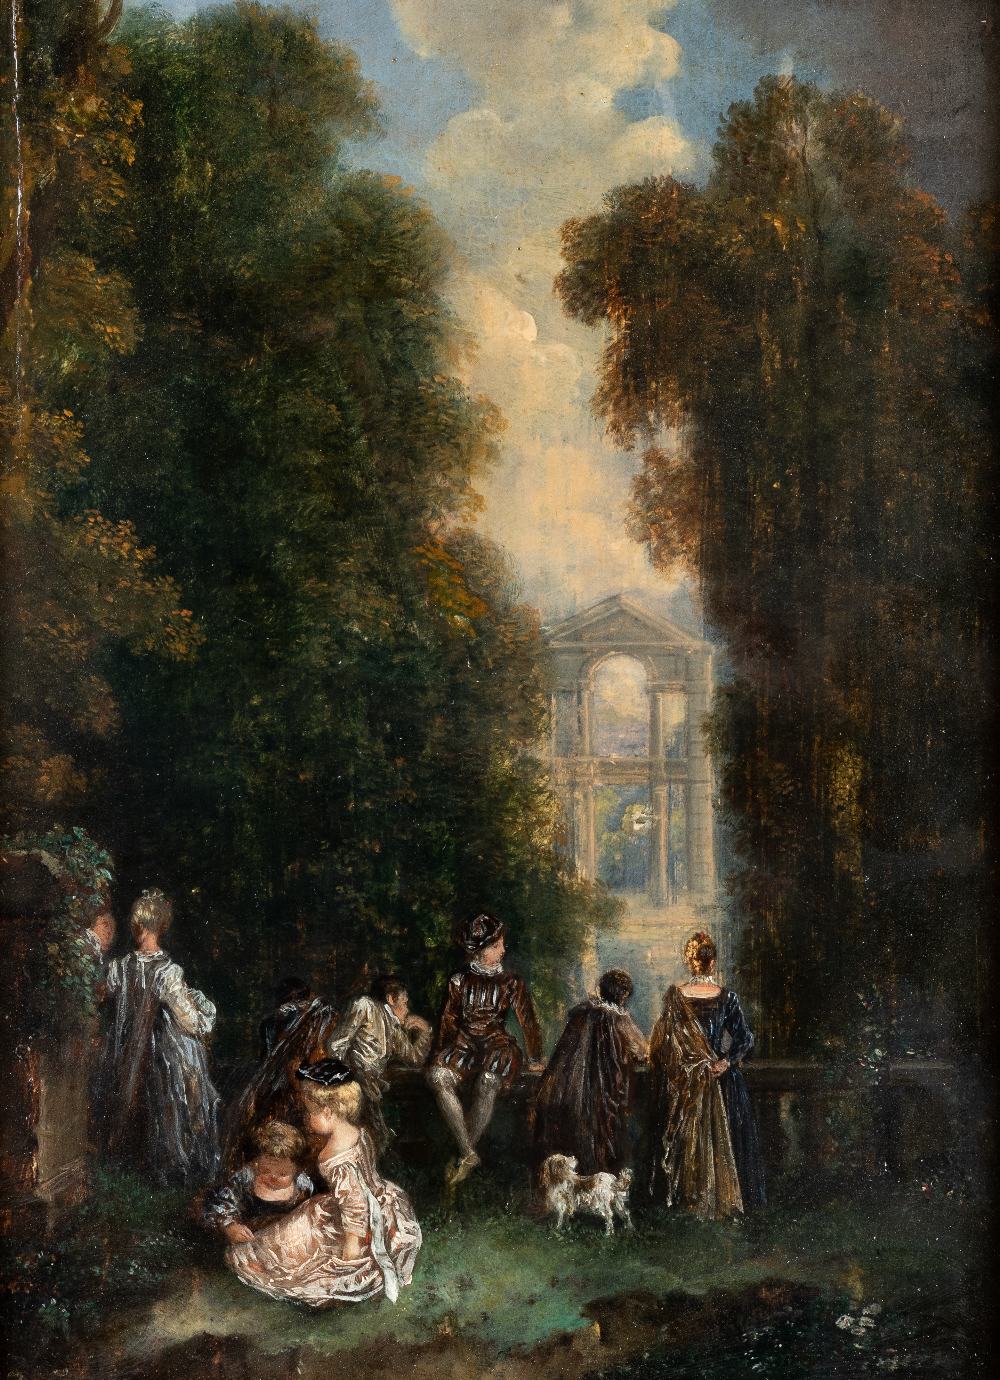 AFTER JEAN-ANTOINE WATTEAU LA PERSPECTIVE oil on panel 21.9 x 16.0cm / 8 3/5 x 6 1/4in The present